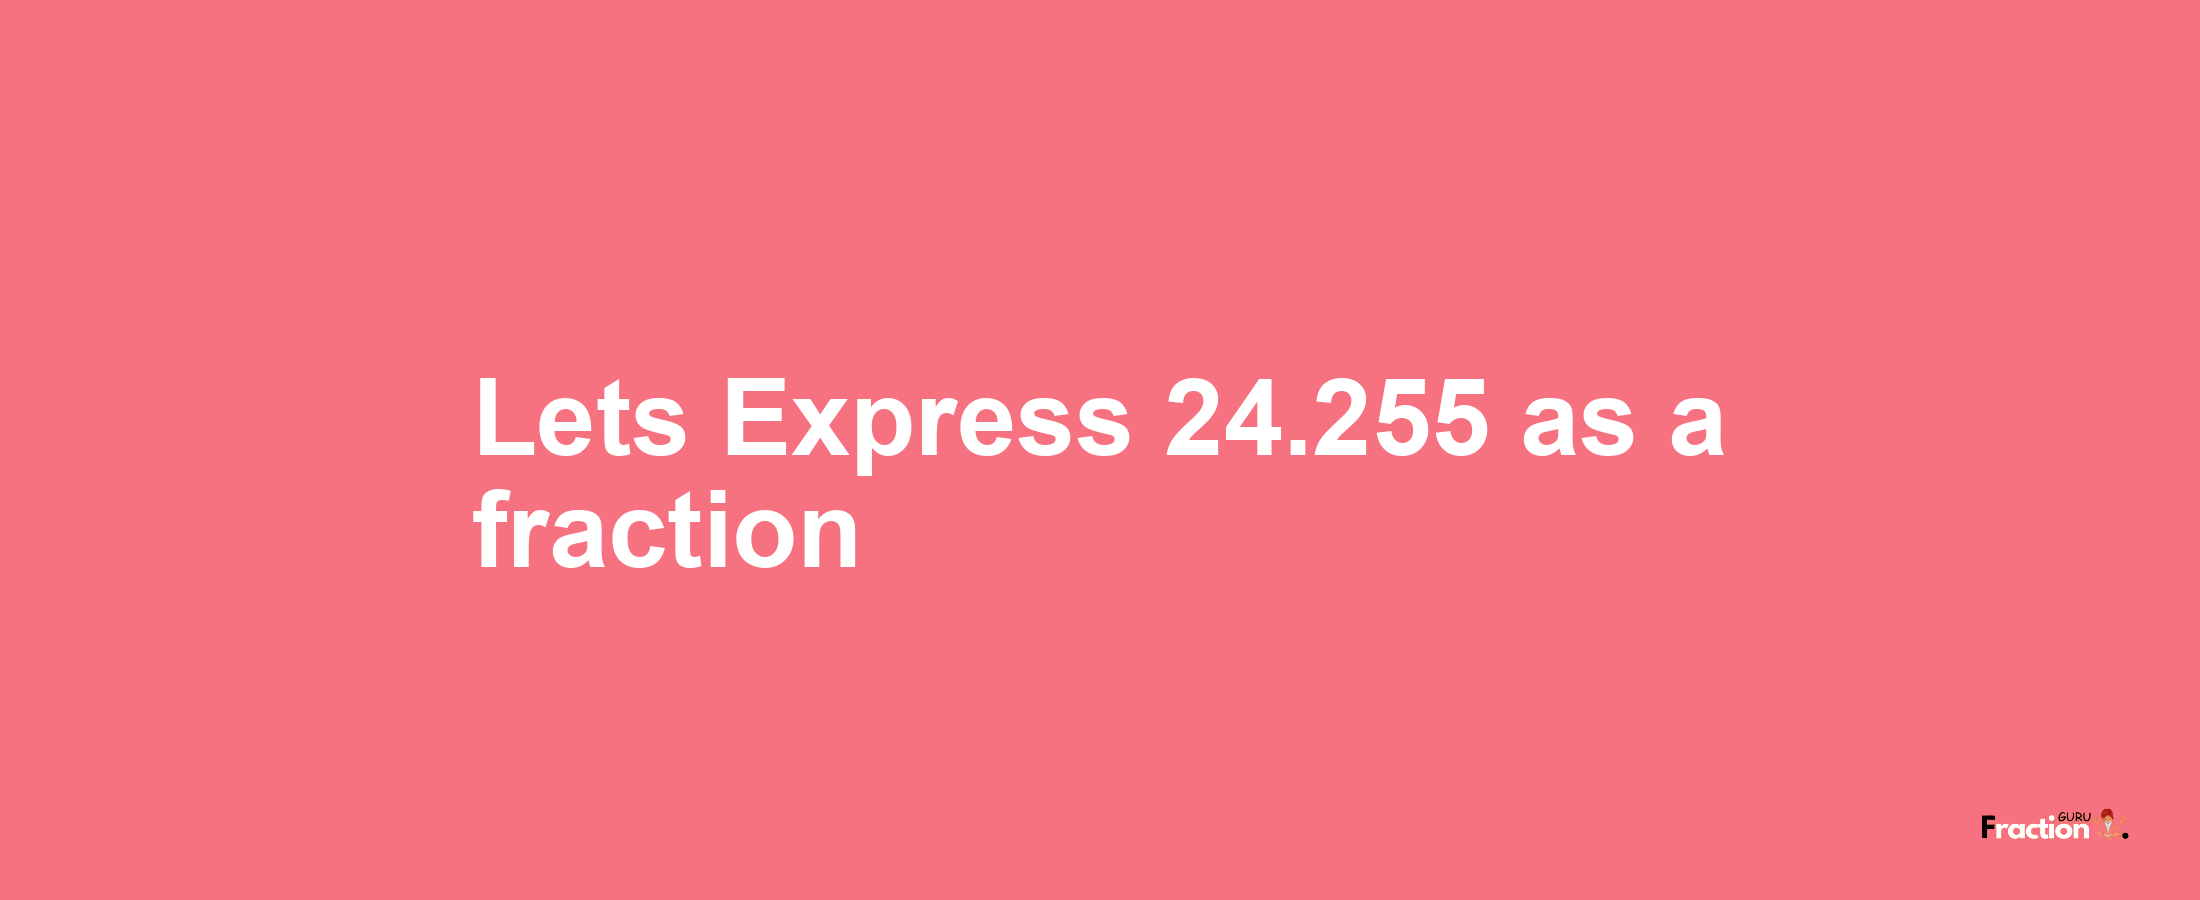 Lets Express 24.255 as afraction